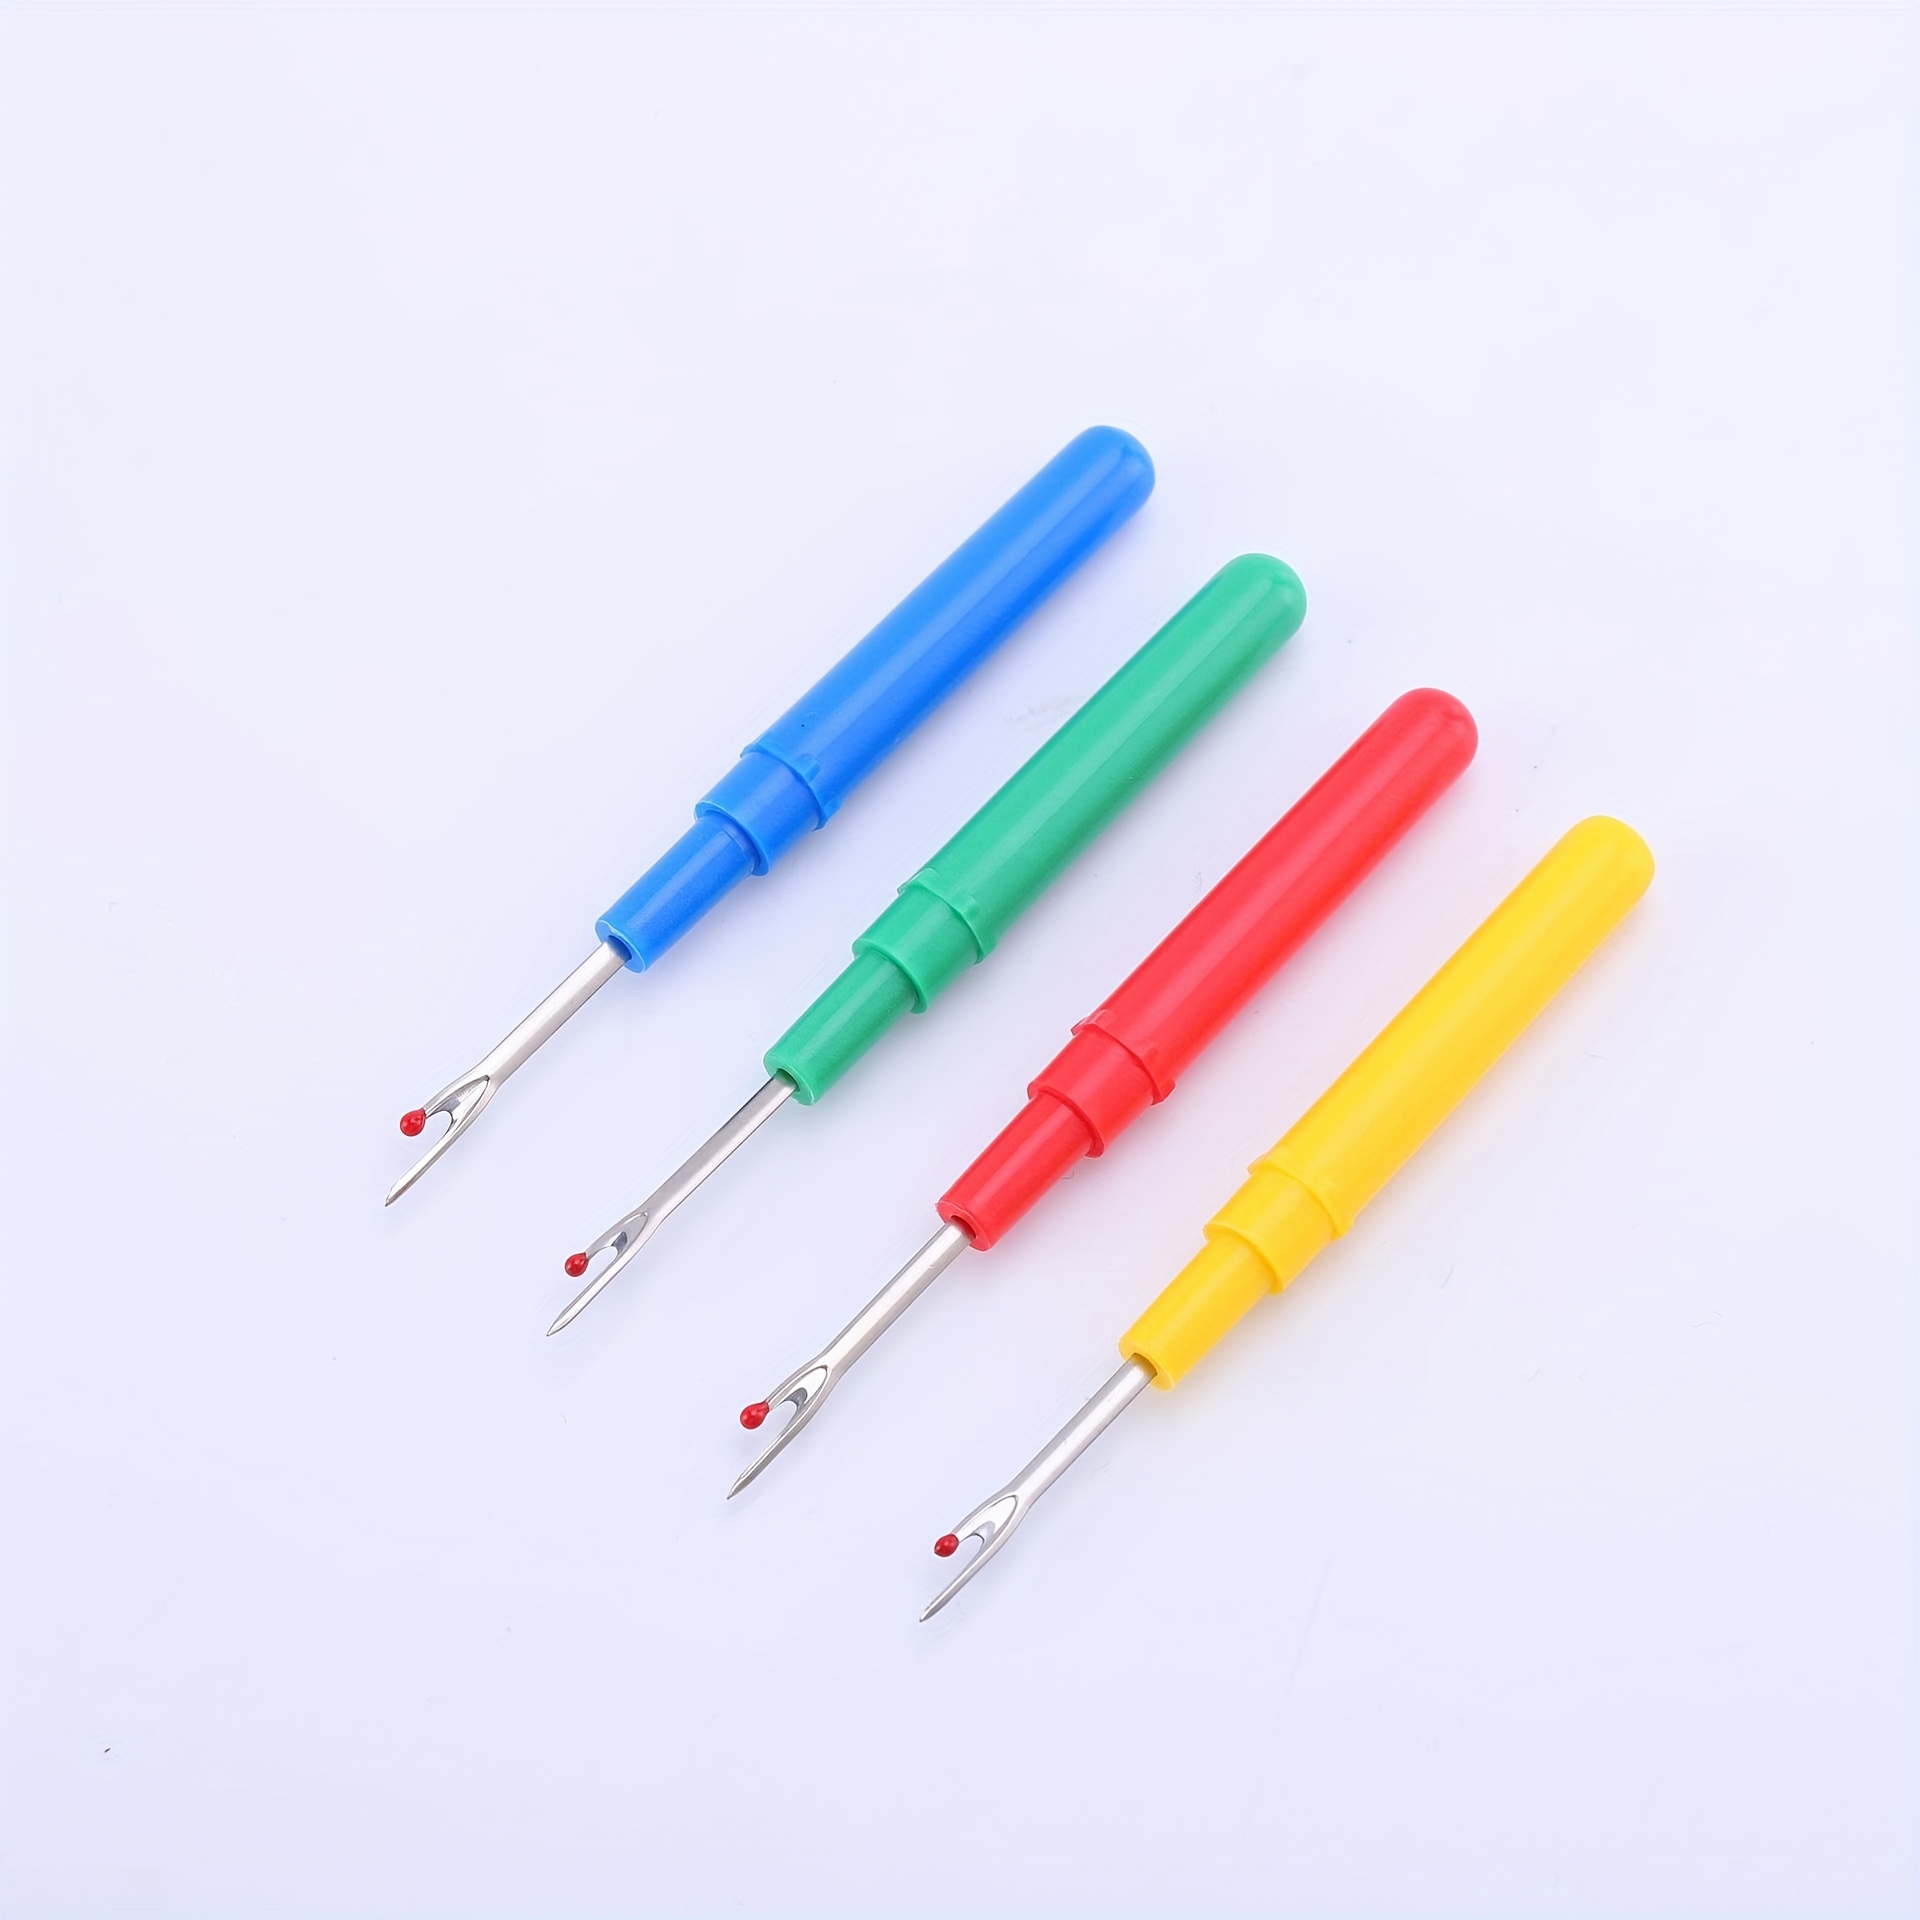 4/8Pcs Sewing Seam Rippers, Handy Stitch Rippers for Sewing/Crafting Removing  Threads Tools Sewing Thread Removers Kit, Hand-held Stitch Ripper Sewing  Tools